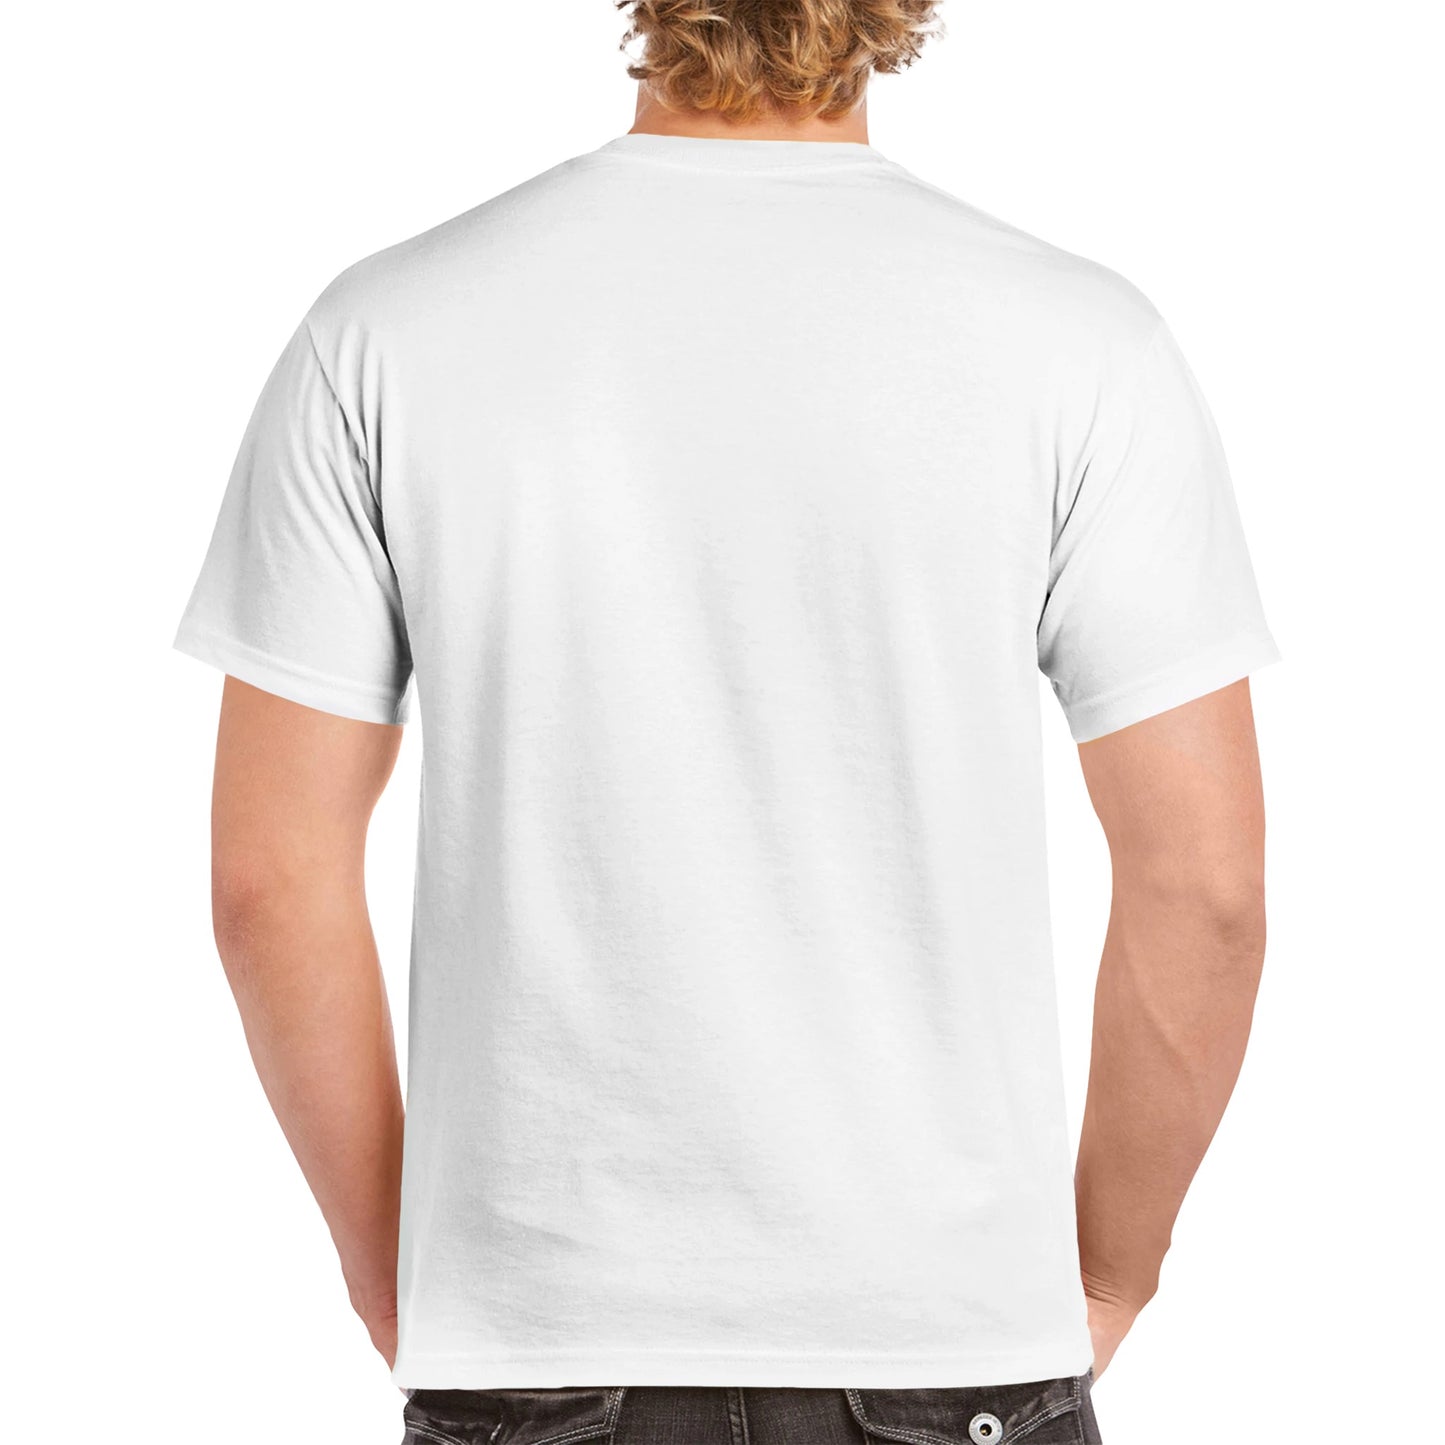 A white comfortable Unisex Crewneck heavyweight cotton t-shirt with funny saying I’d be a PickleBall SuperStar if it wasn’t for the Darn Net and Lines and Let’s Play Pickleball logo on the front from WhatYa Say Apparel worn by blonde-haired male rear view.